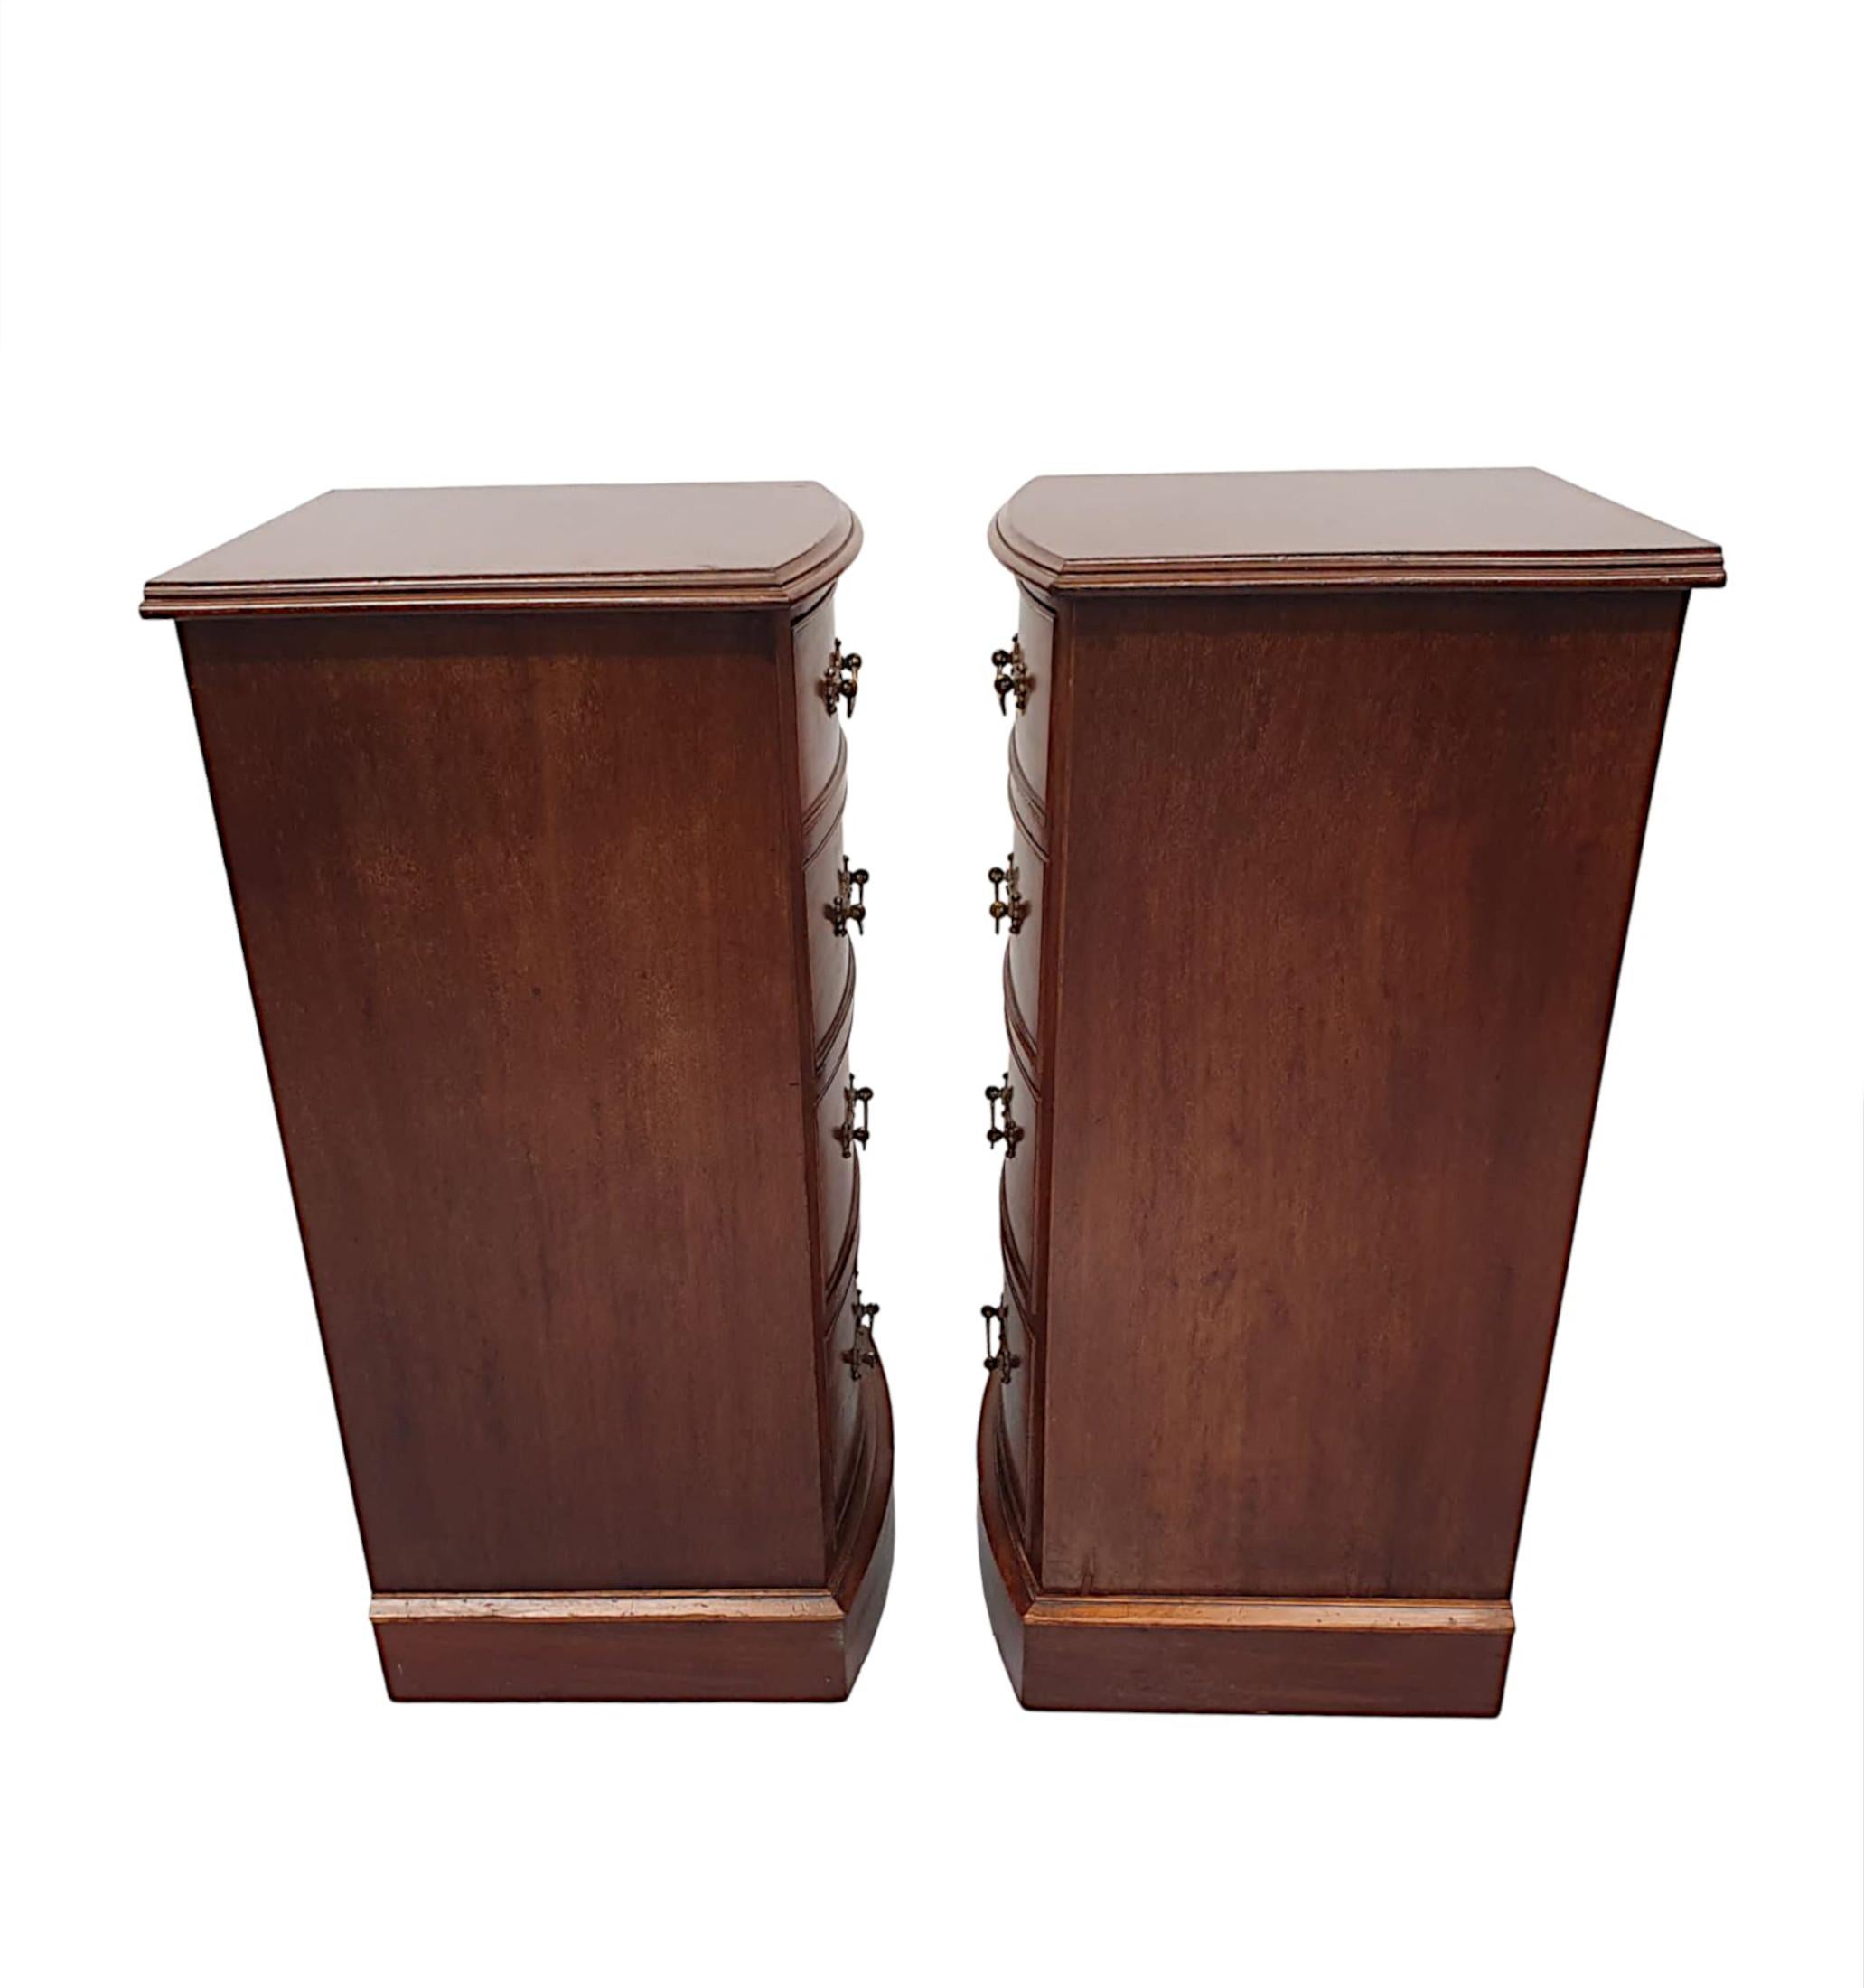 A Very Fine Pair of Large 19th Century Bow Fronted Bedside Chests For Sale 1